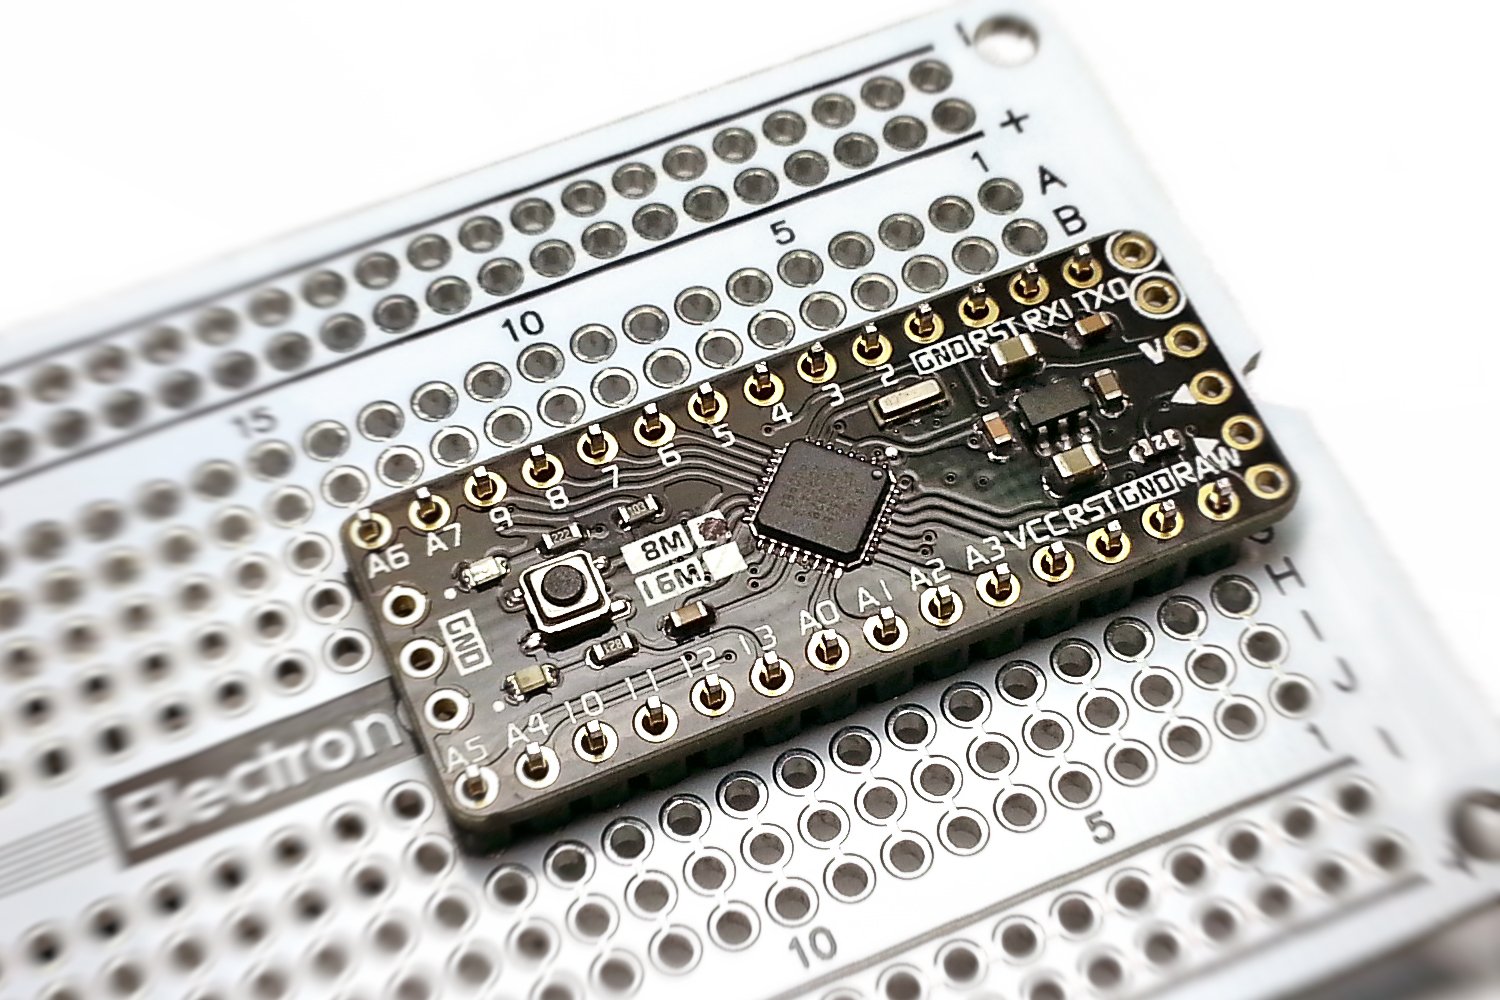 Atmega328 Module V1 from BBTech on Tindie